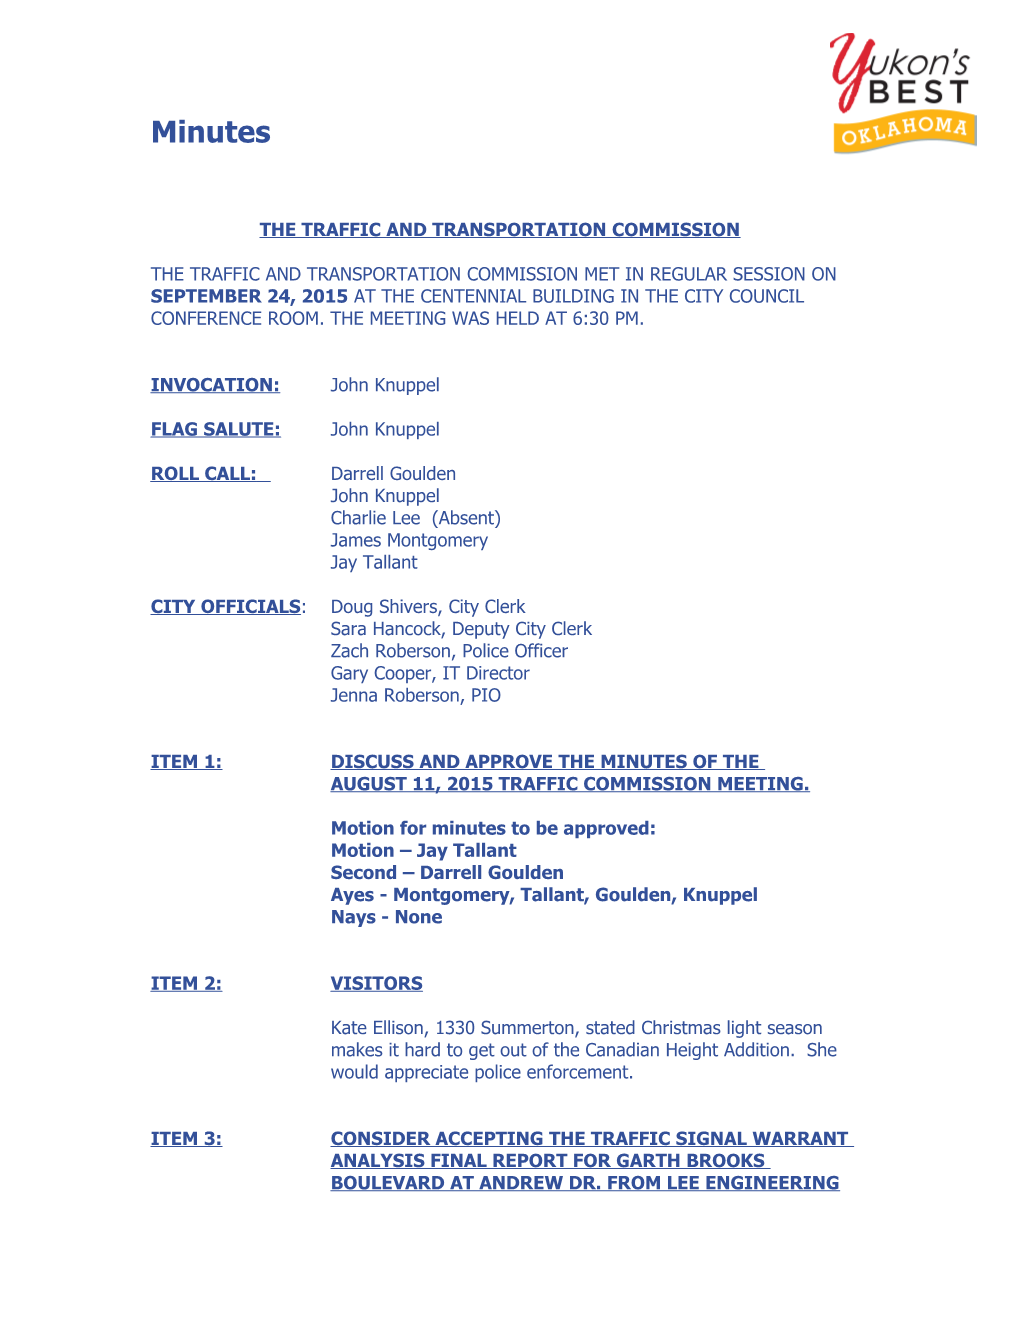 The Traffic and Transportation Commission Minutes